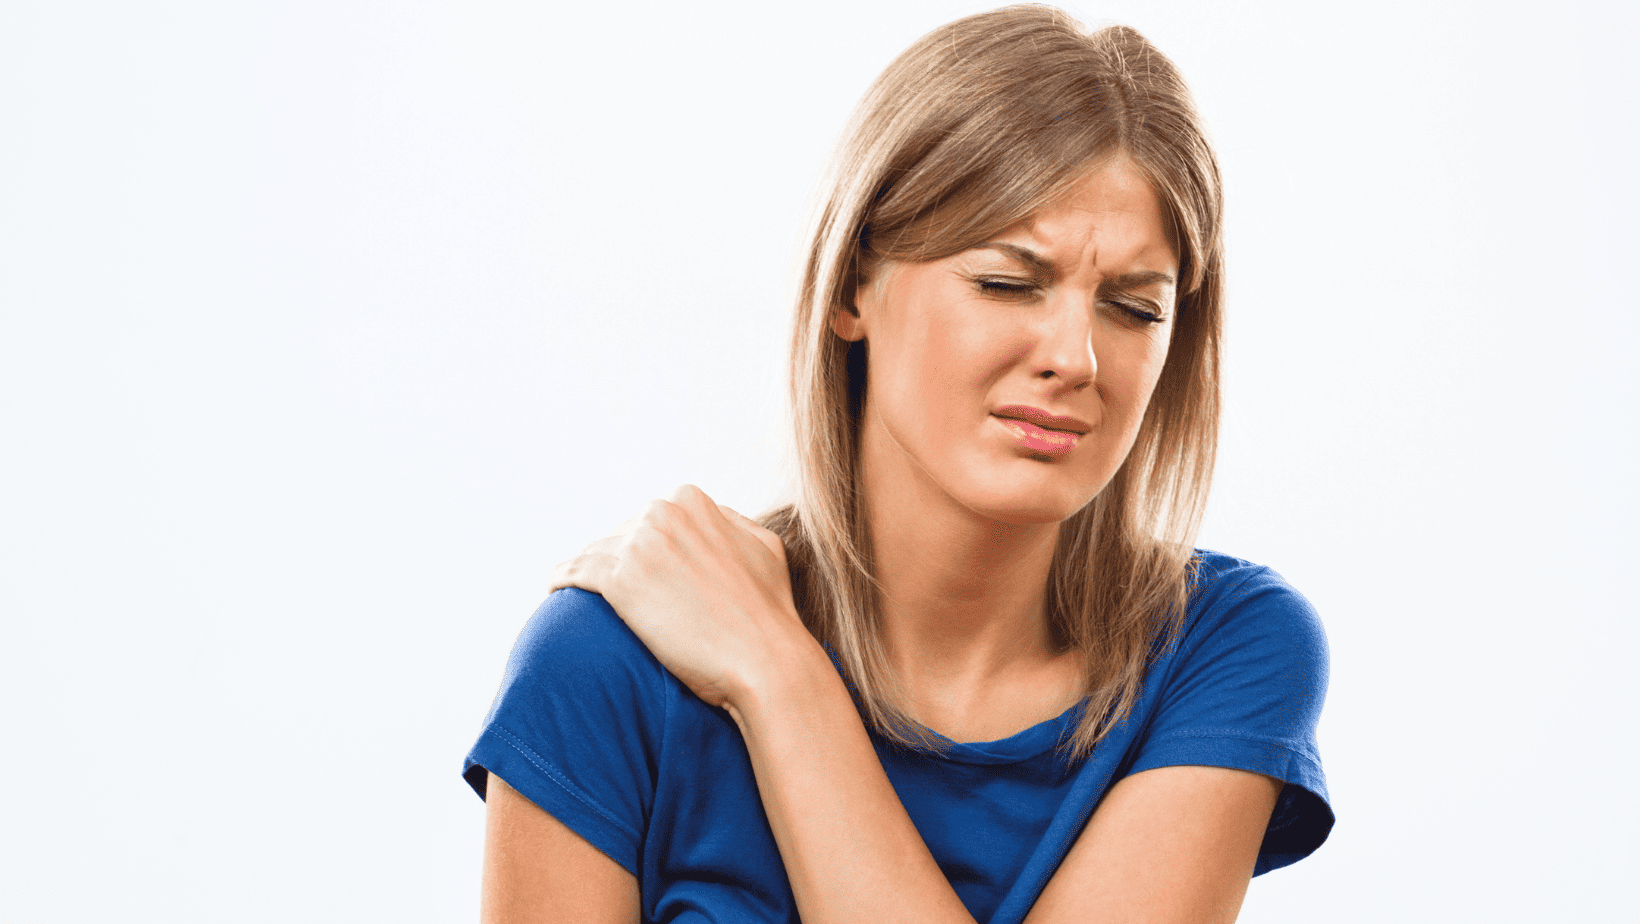 What Is Causing Me To Have Shoulder Pain?